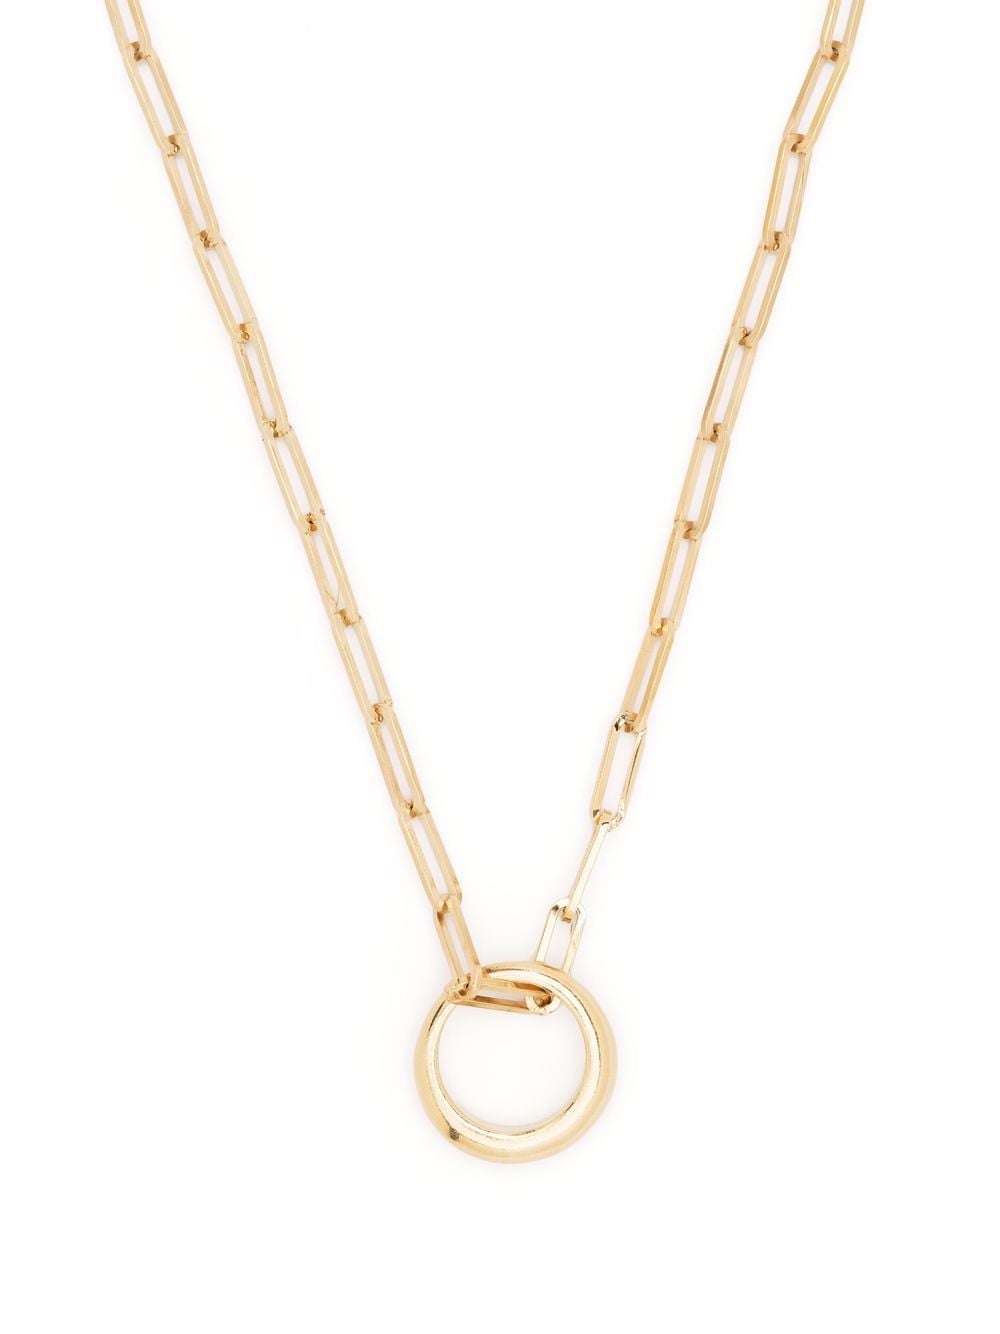 ISABEL MARANT RING PENDANT CHAIN NECKLACE